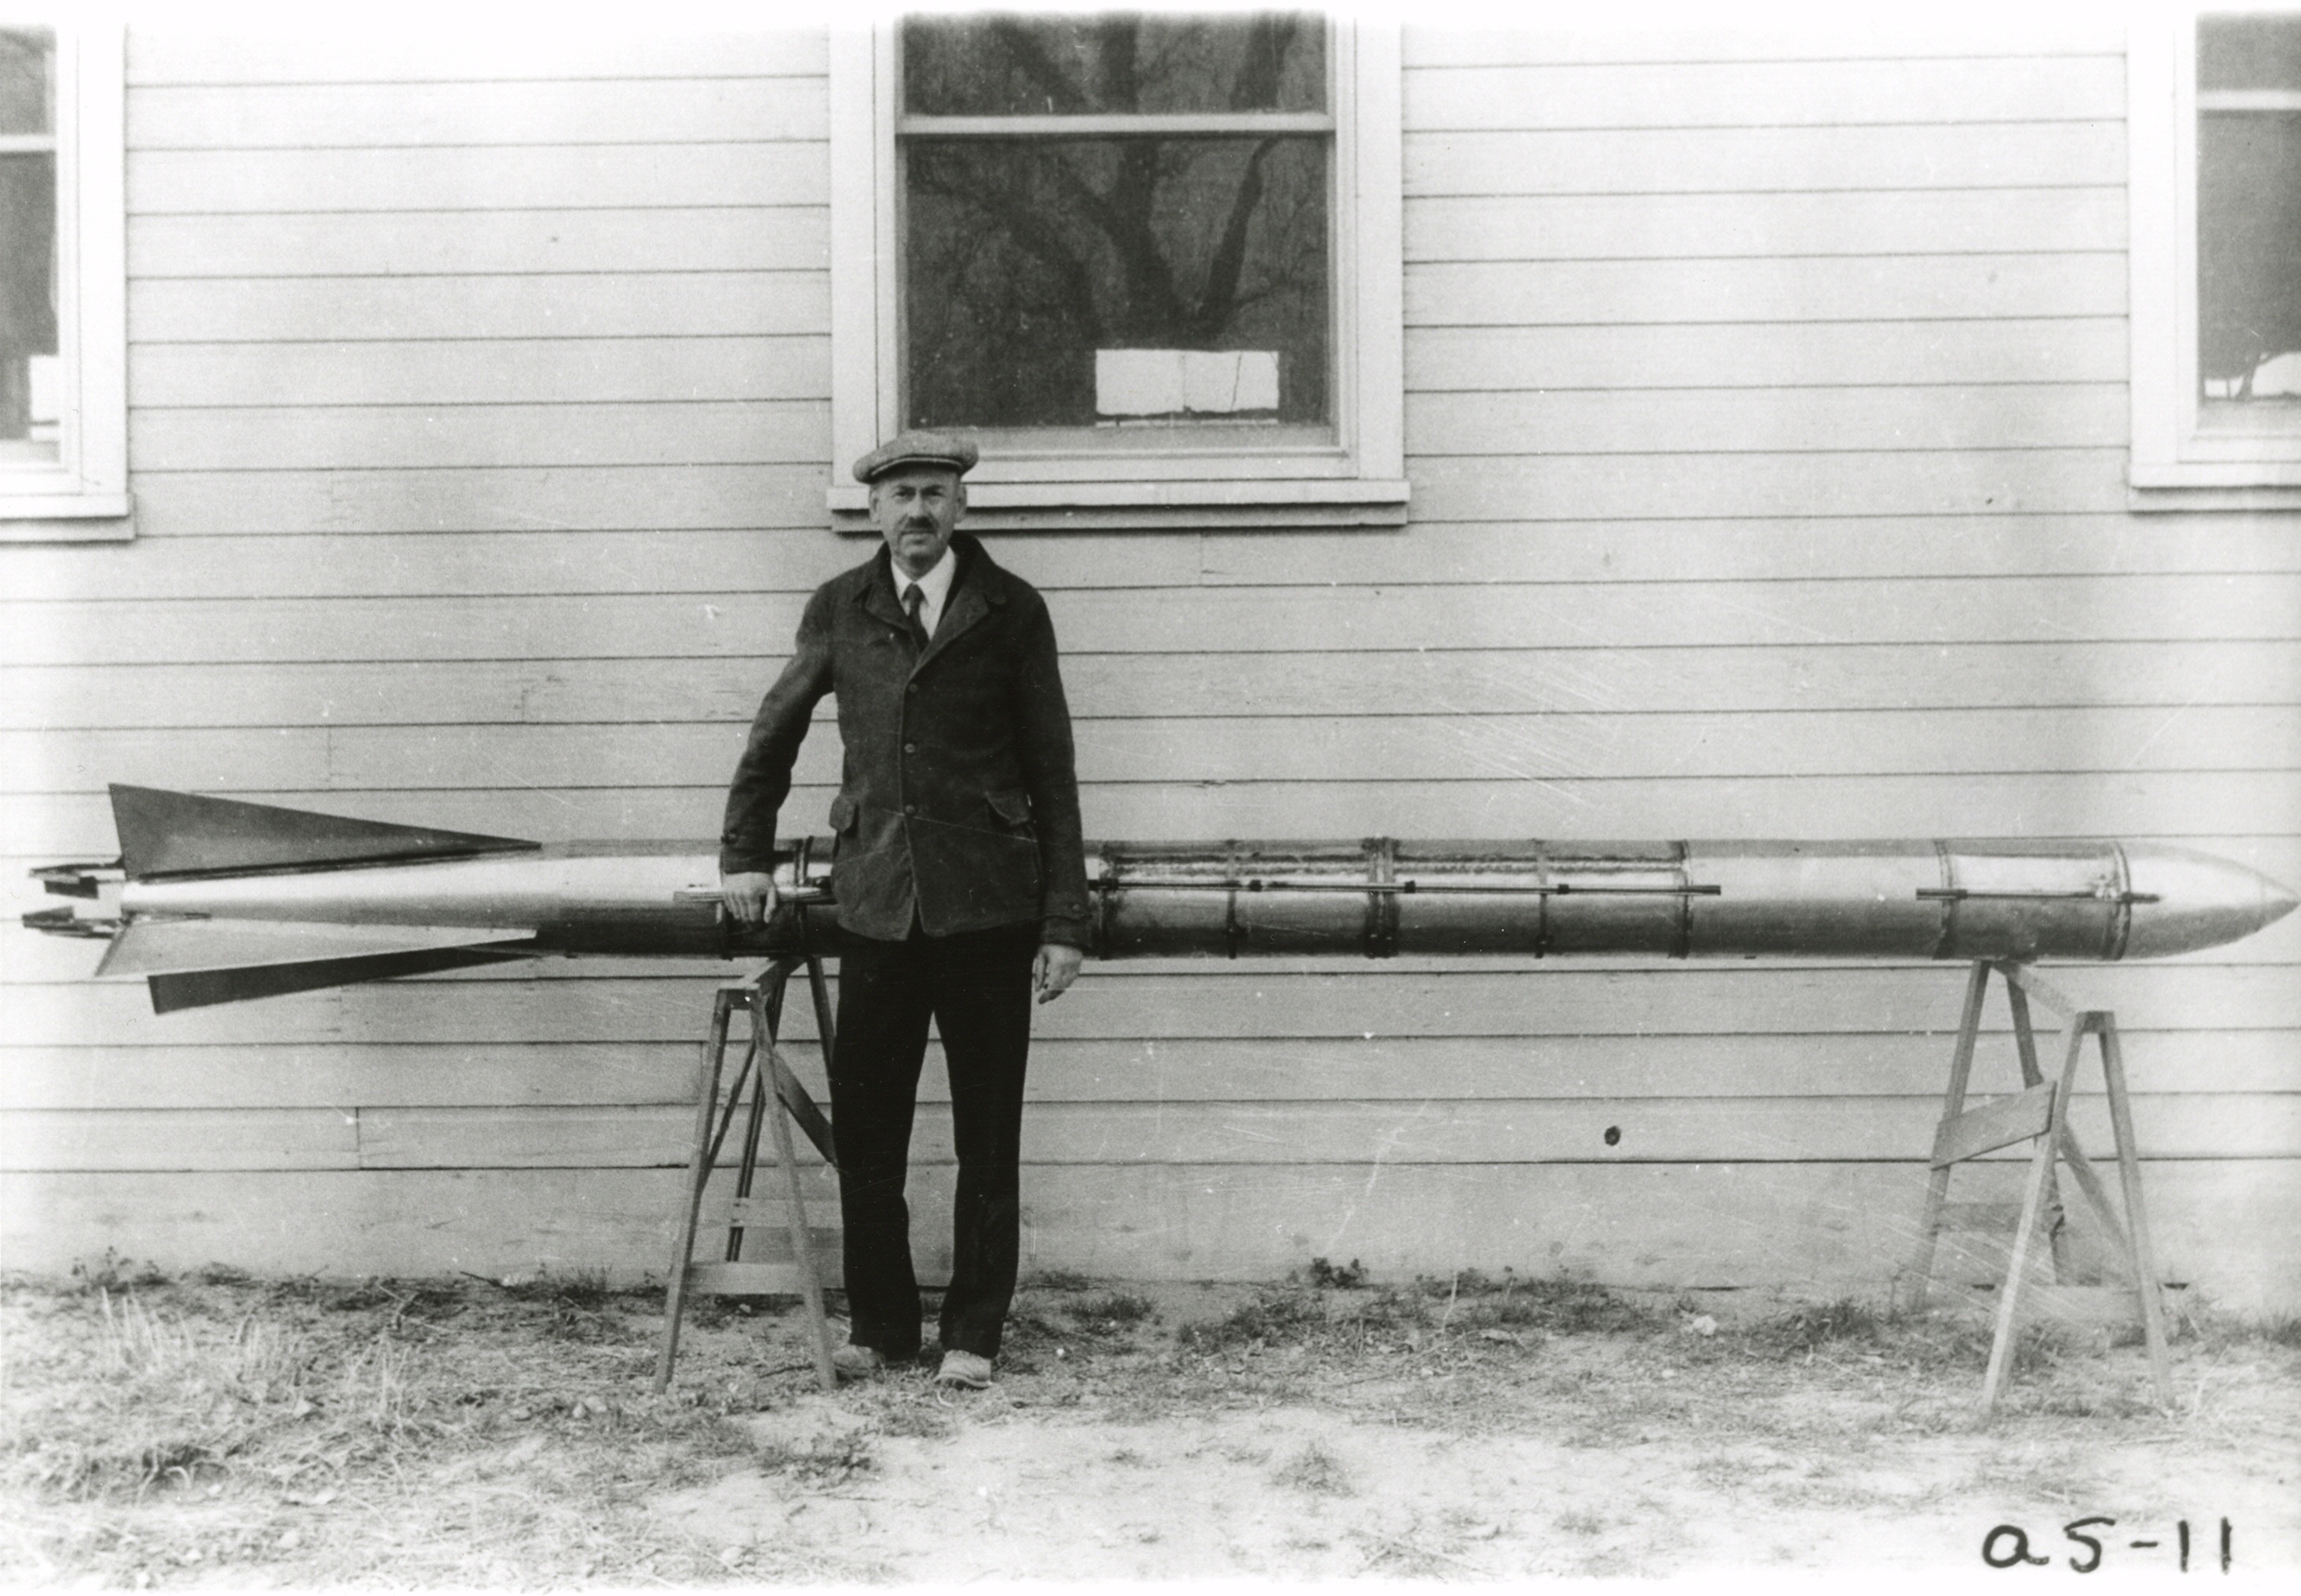 Dr. Robert H. Goddard with one of his liquid-fueled A-series rockets at Roswell, New Mexico, circa 1935. (National Air and Space Museum Archives, Smithsonian Institution, Image Number 84-8949)